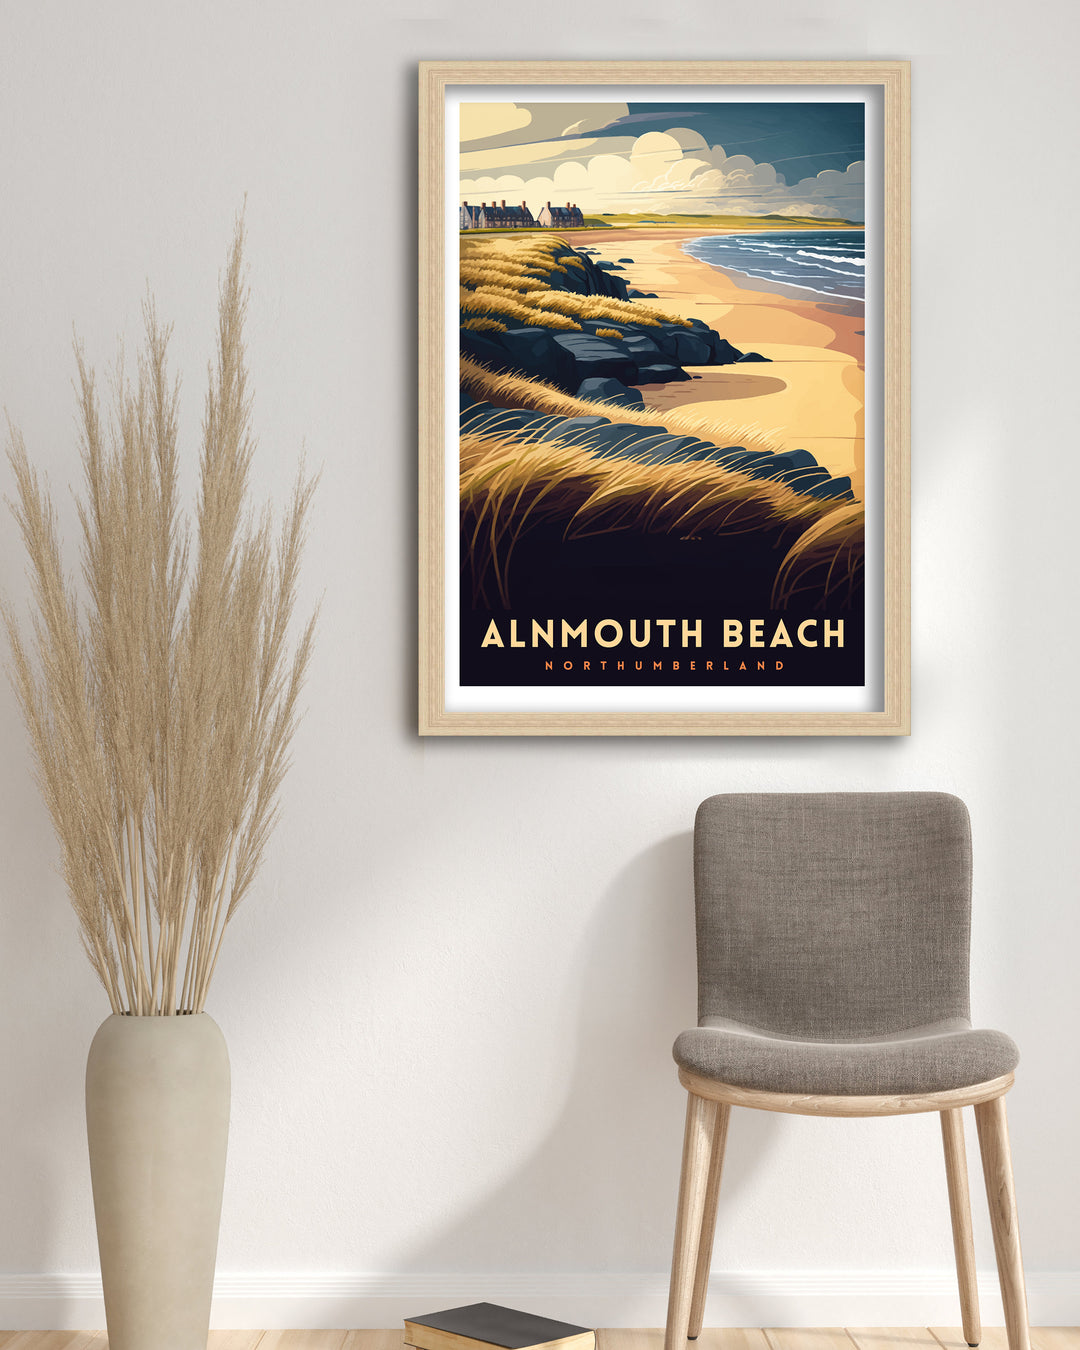 Alnmouth Beach Northumberland Travel Poster Alnmouth Wall Decor Alnmouth Home Living Decor Northumberland Illustration Travel Poster Gift